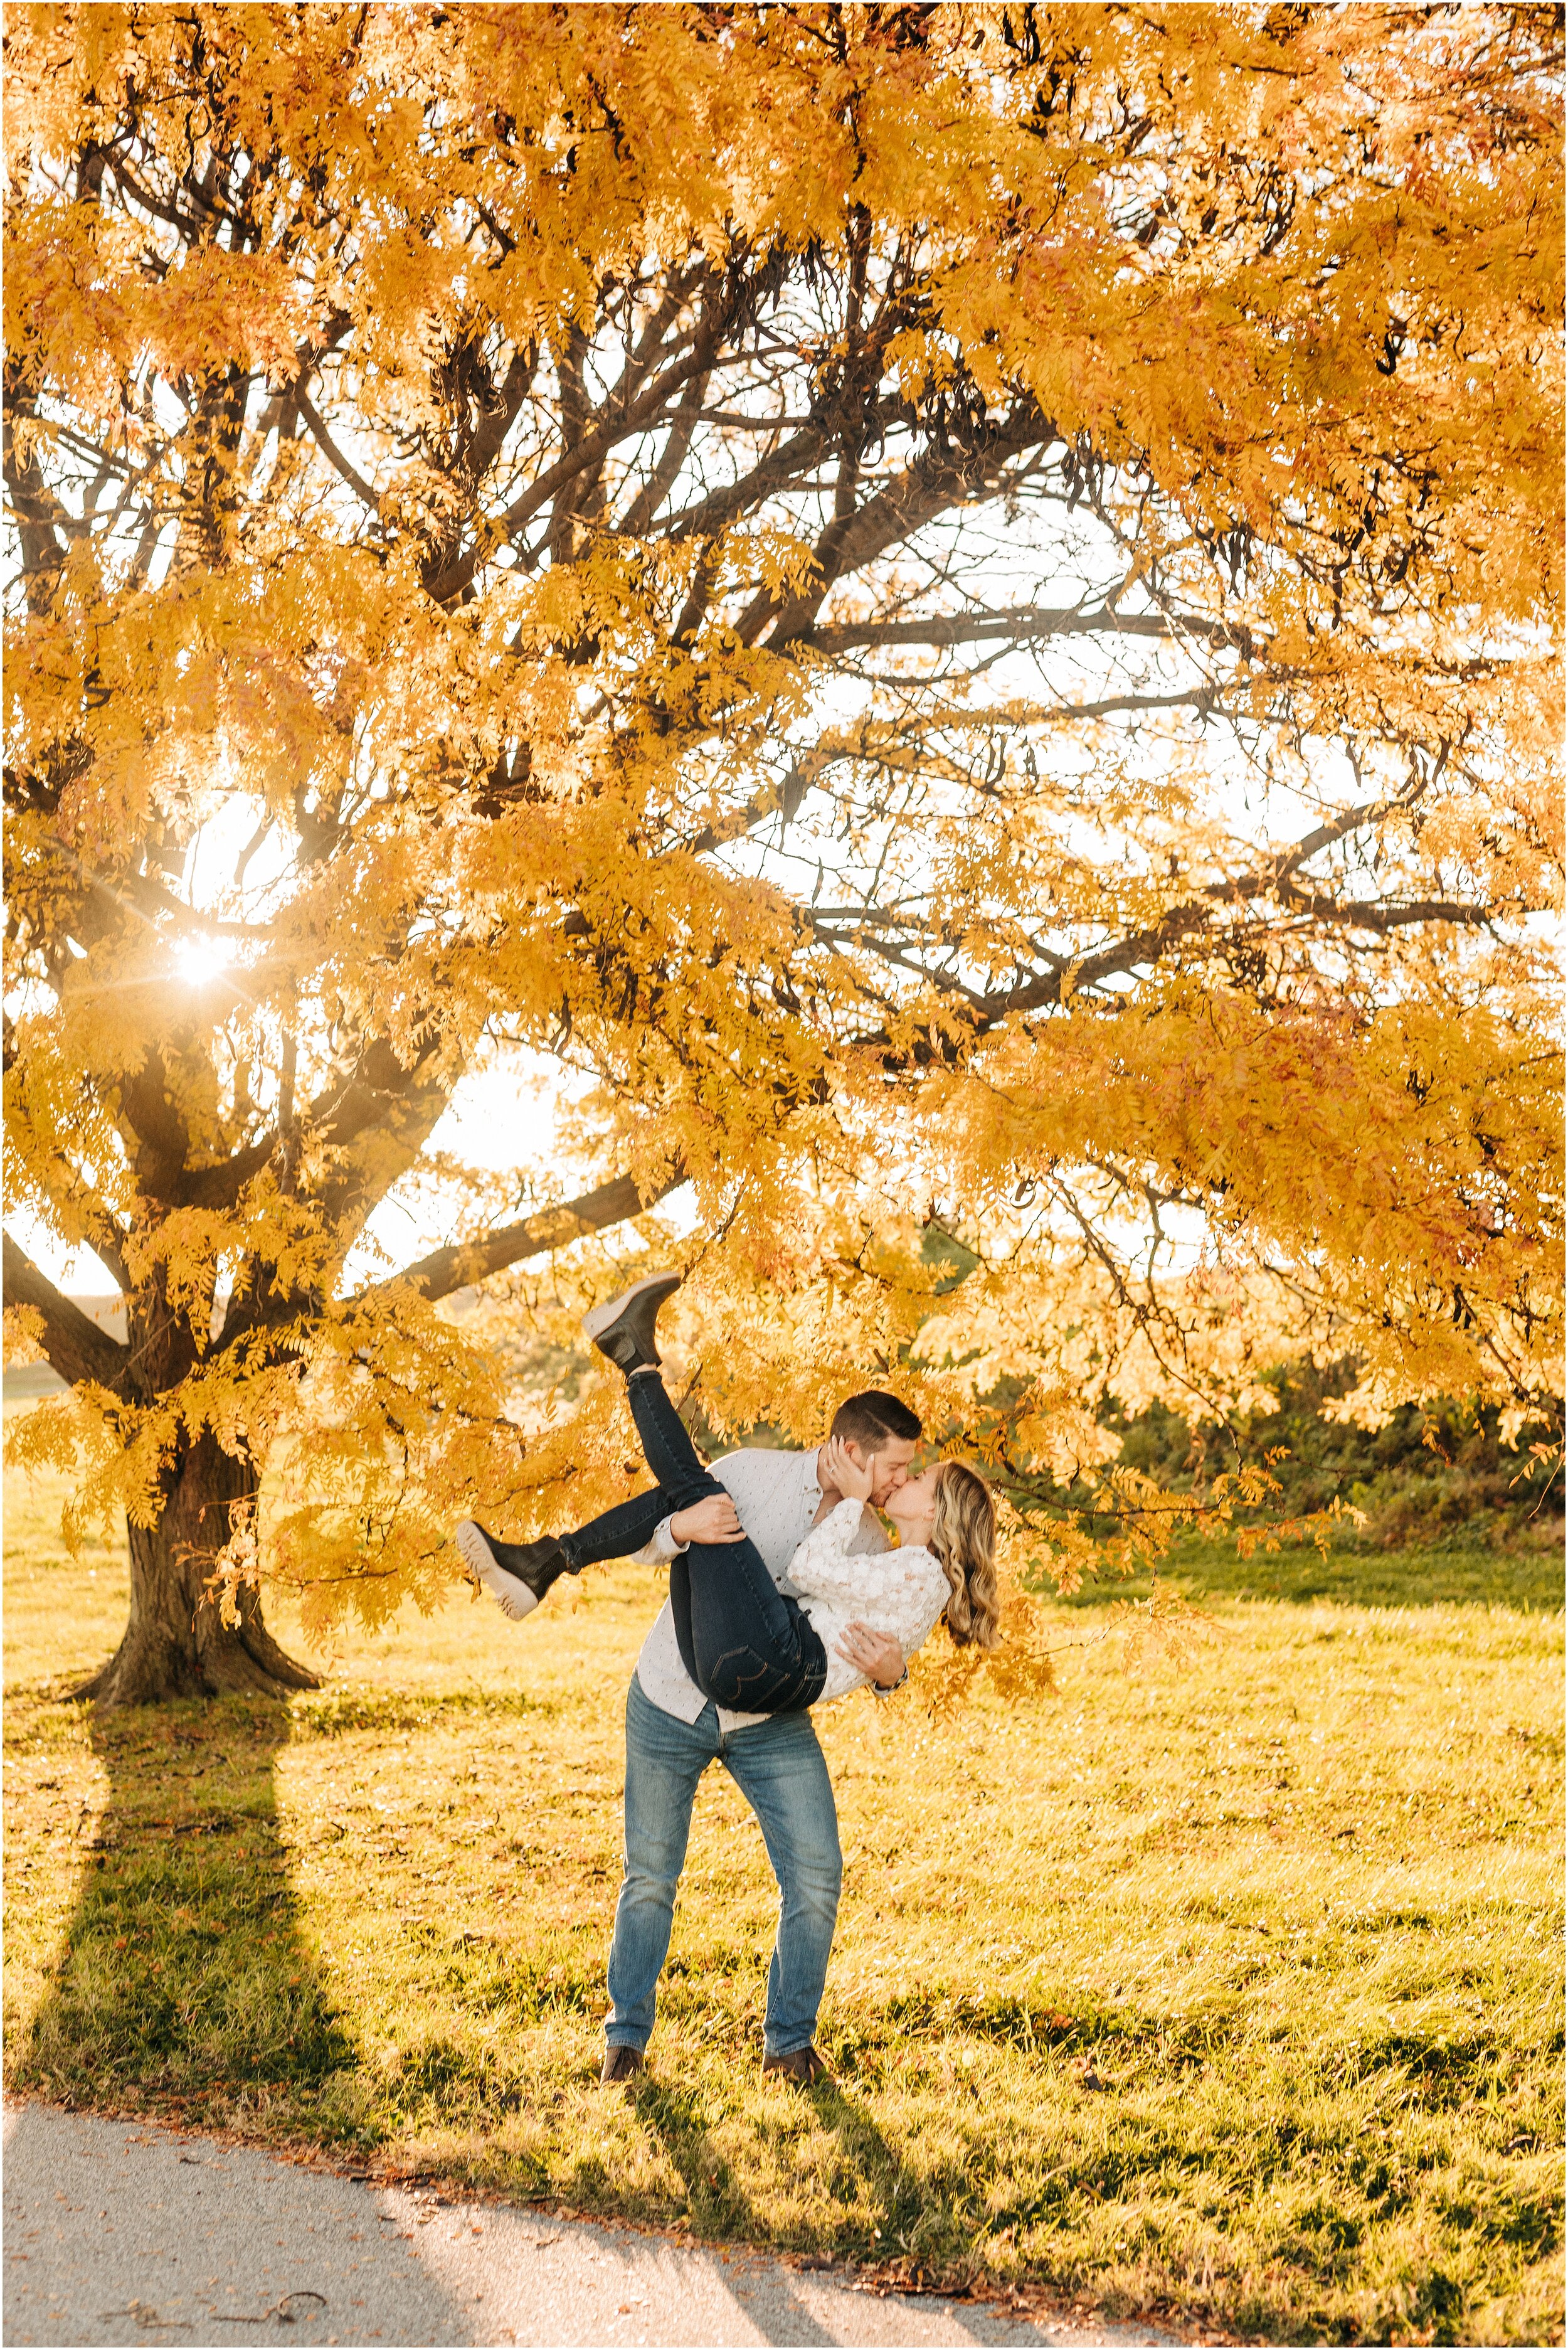 hannah leigh photography Baltimore City Maryland October Engagement Session_7062.jpg